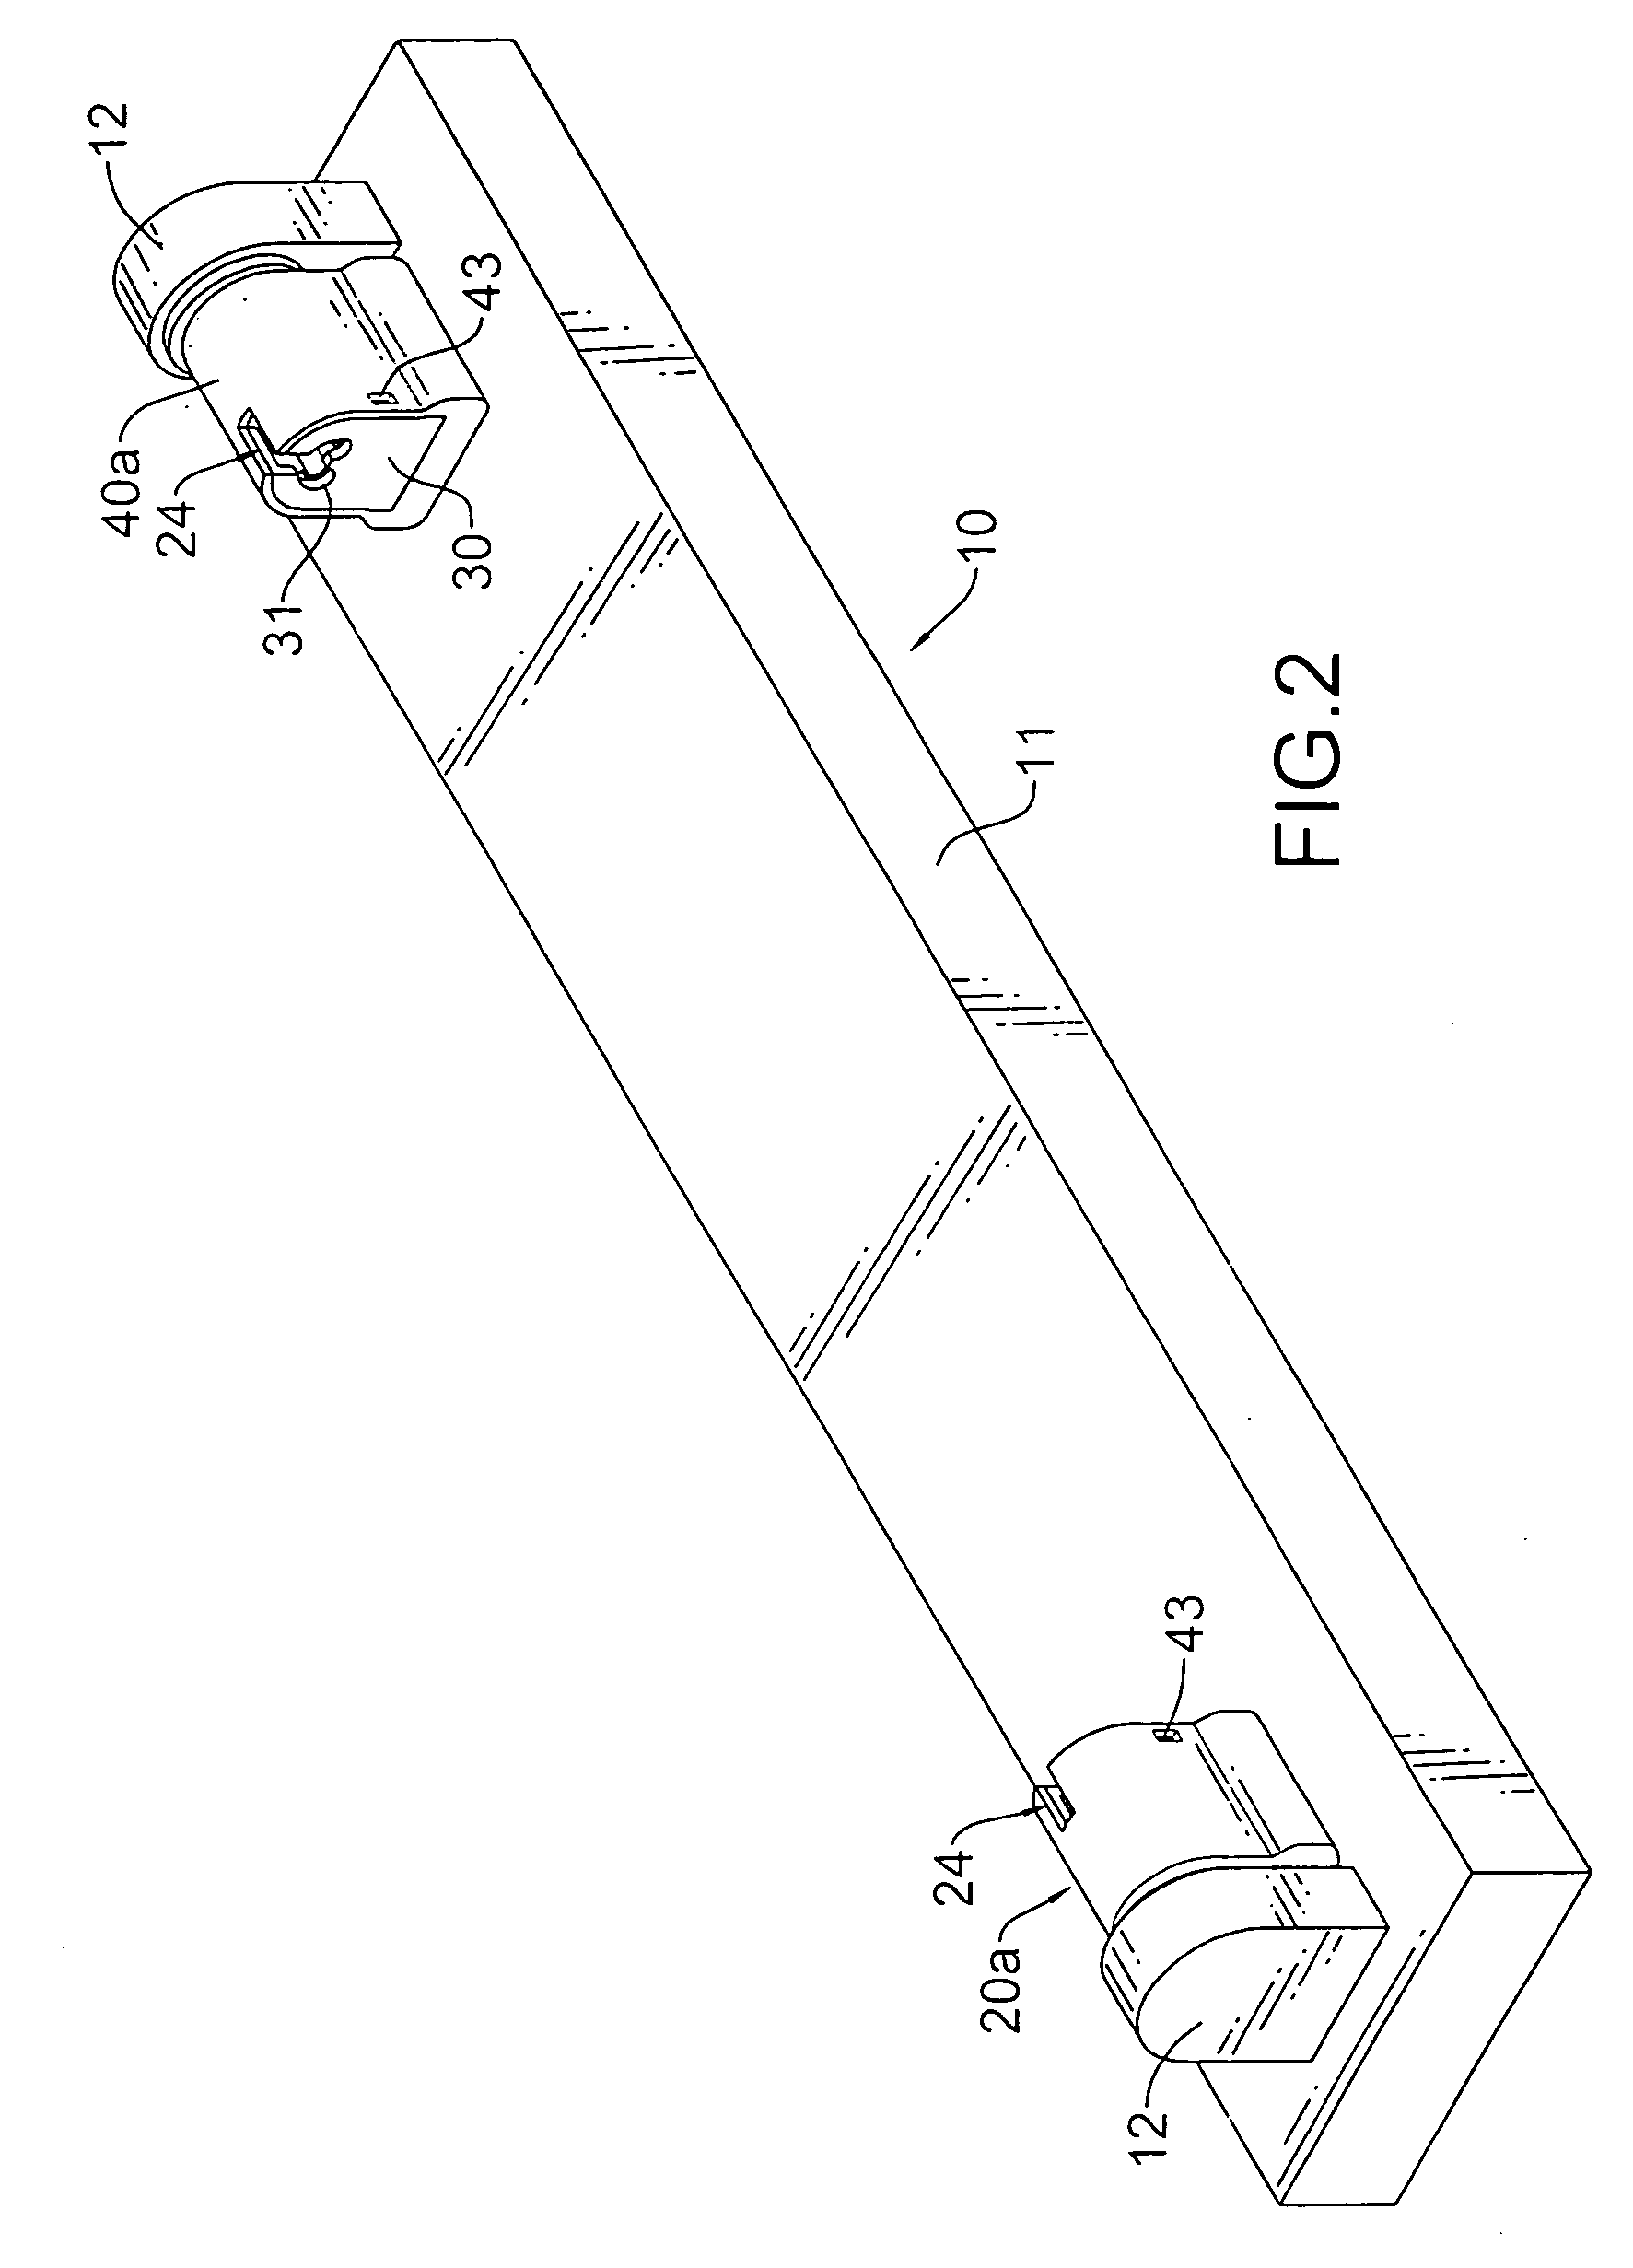 Lamp conversion assembly